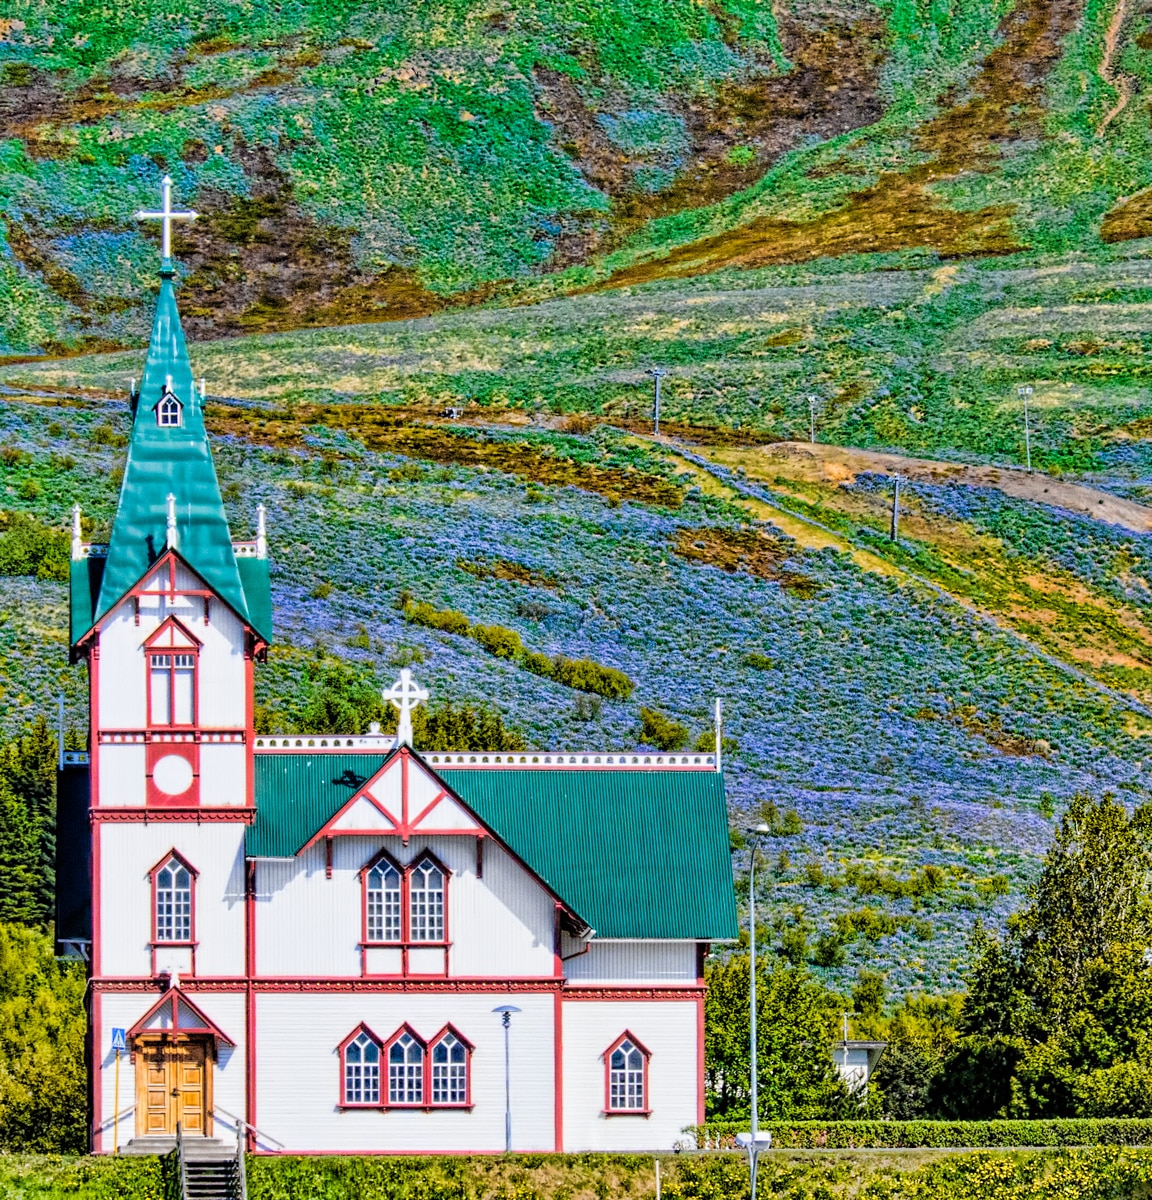 The church in the port town of Húsavík is a major landmark, with the belltower measuring 26 meters (over 85 feet) in height. It was built in 1907 from wood, a somewhat costly building material because it had to be imported from Norway. On the hillside behind the church is purple lupine.